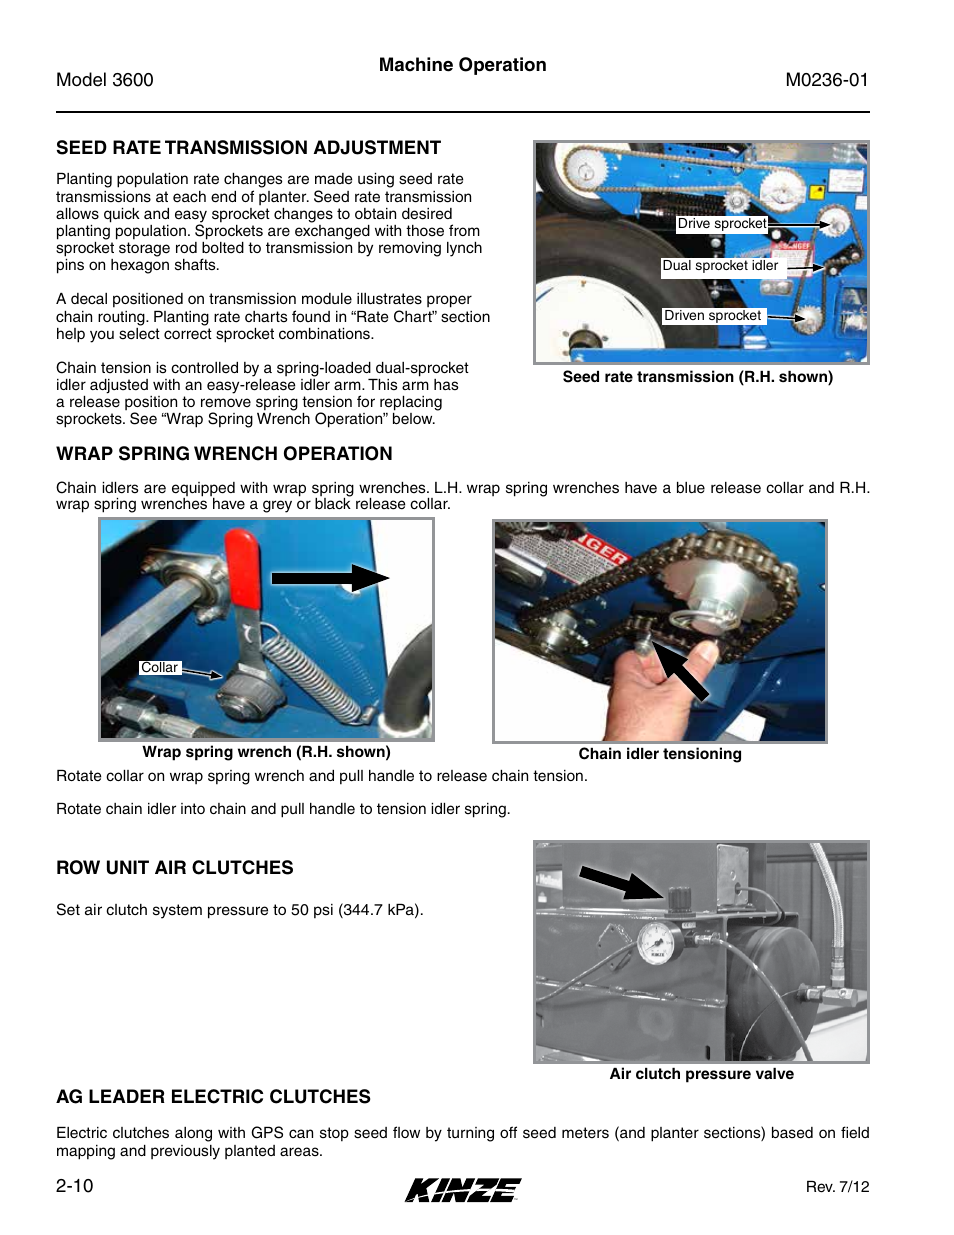 Seed rate transmission adjustment, Wrap spring wrench operation, Row unit air clutches | Ag leader electric clutches, Seed rate transmission adjustment -10, Wrap spring wrench operation -10, Row unit air clutches -10, Ag leader electric clutches -10 | Kinze 3600 Lift and Rotate Planter Rev. 7/14 User Manual | Page 20 / 172